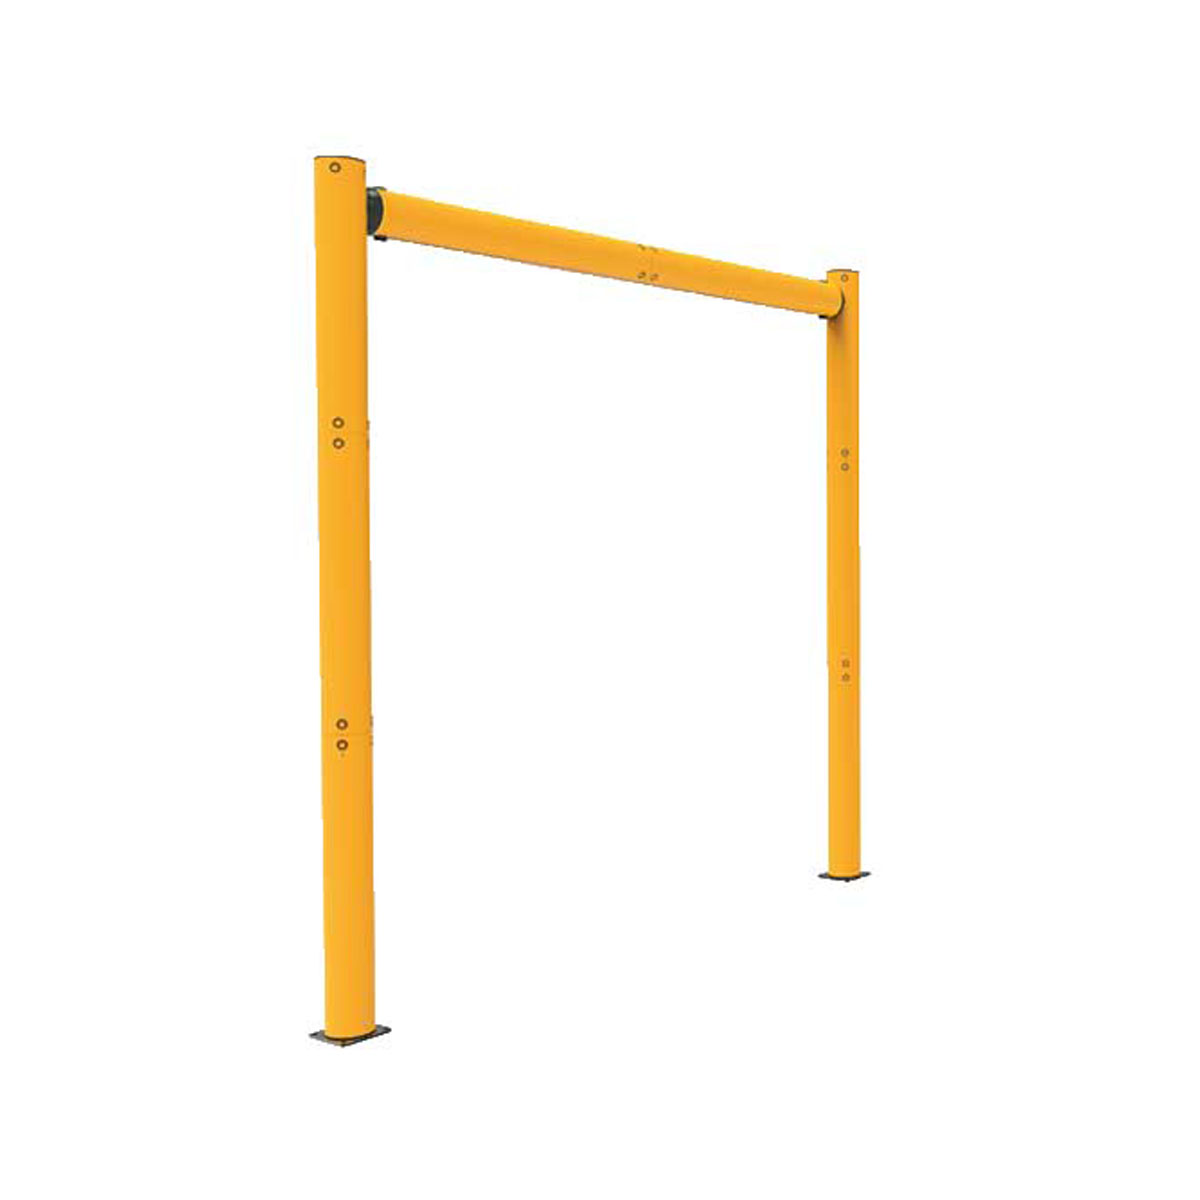 Buy Doorway Height Restrictor available at Astrolift NZ